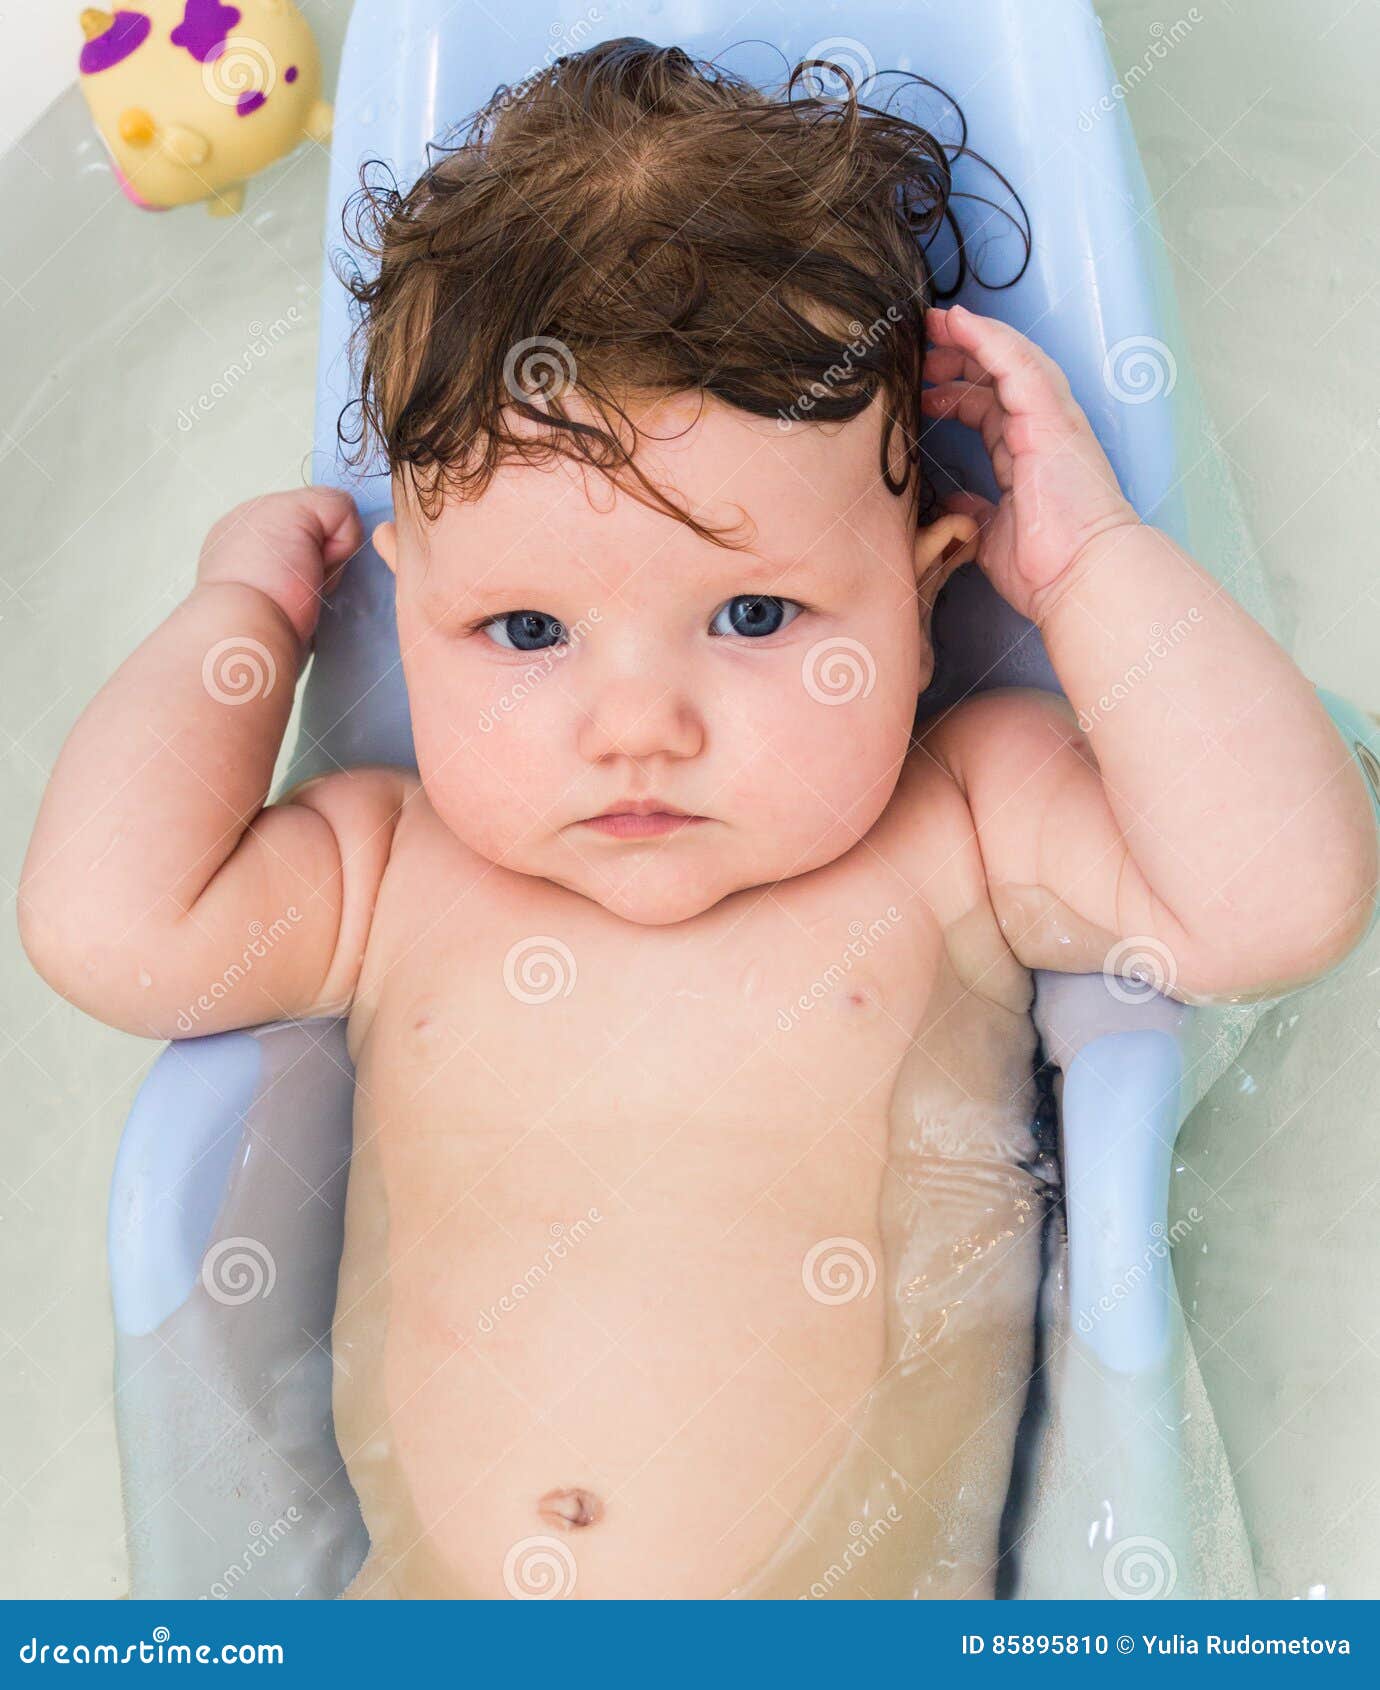 Little Baby Swims In The Bathtub. Stock Photo - Image of ...